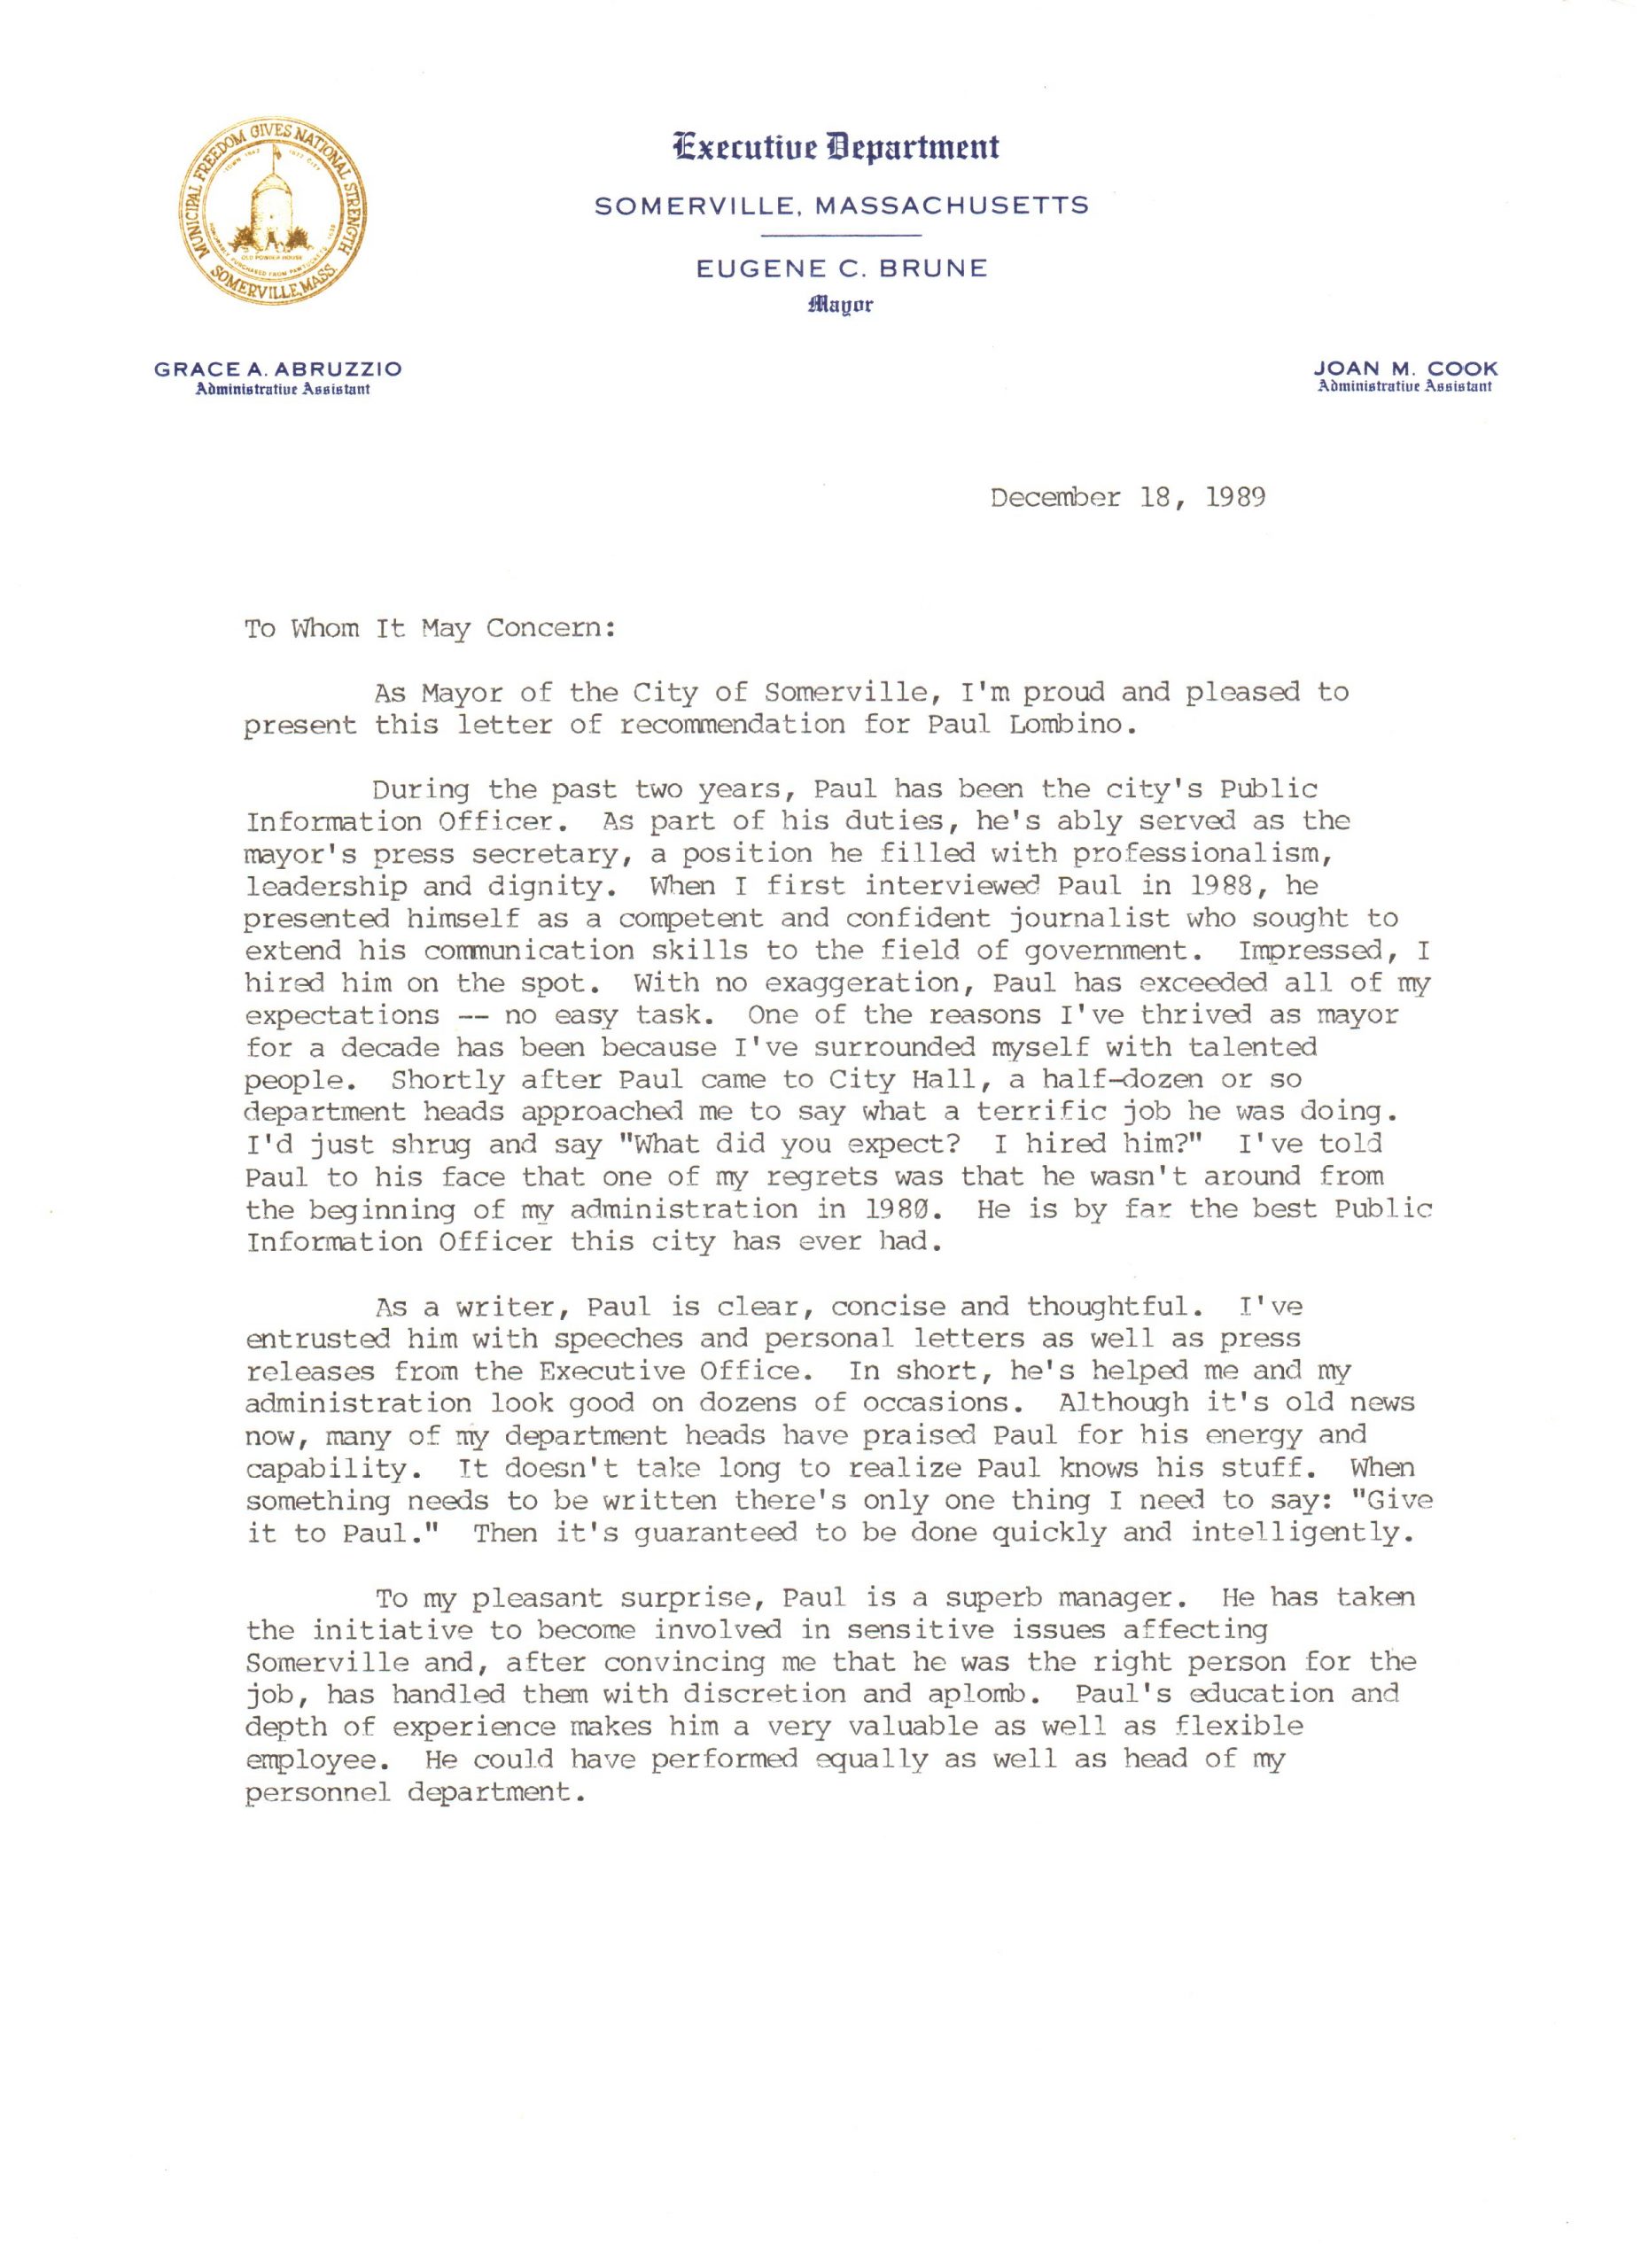 Letter Of Recommendation From Mayor Eugene C Brune throughout dimensions 2552 X 3510